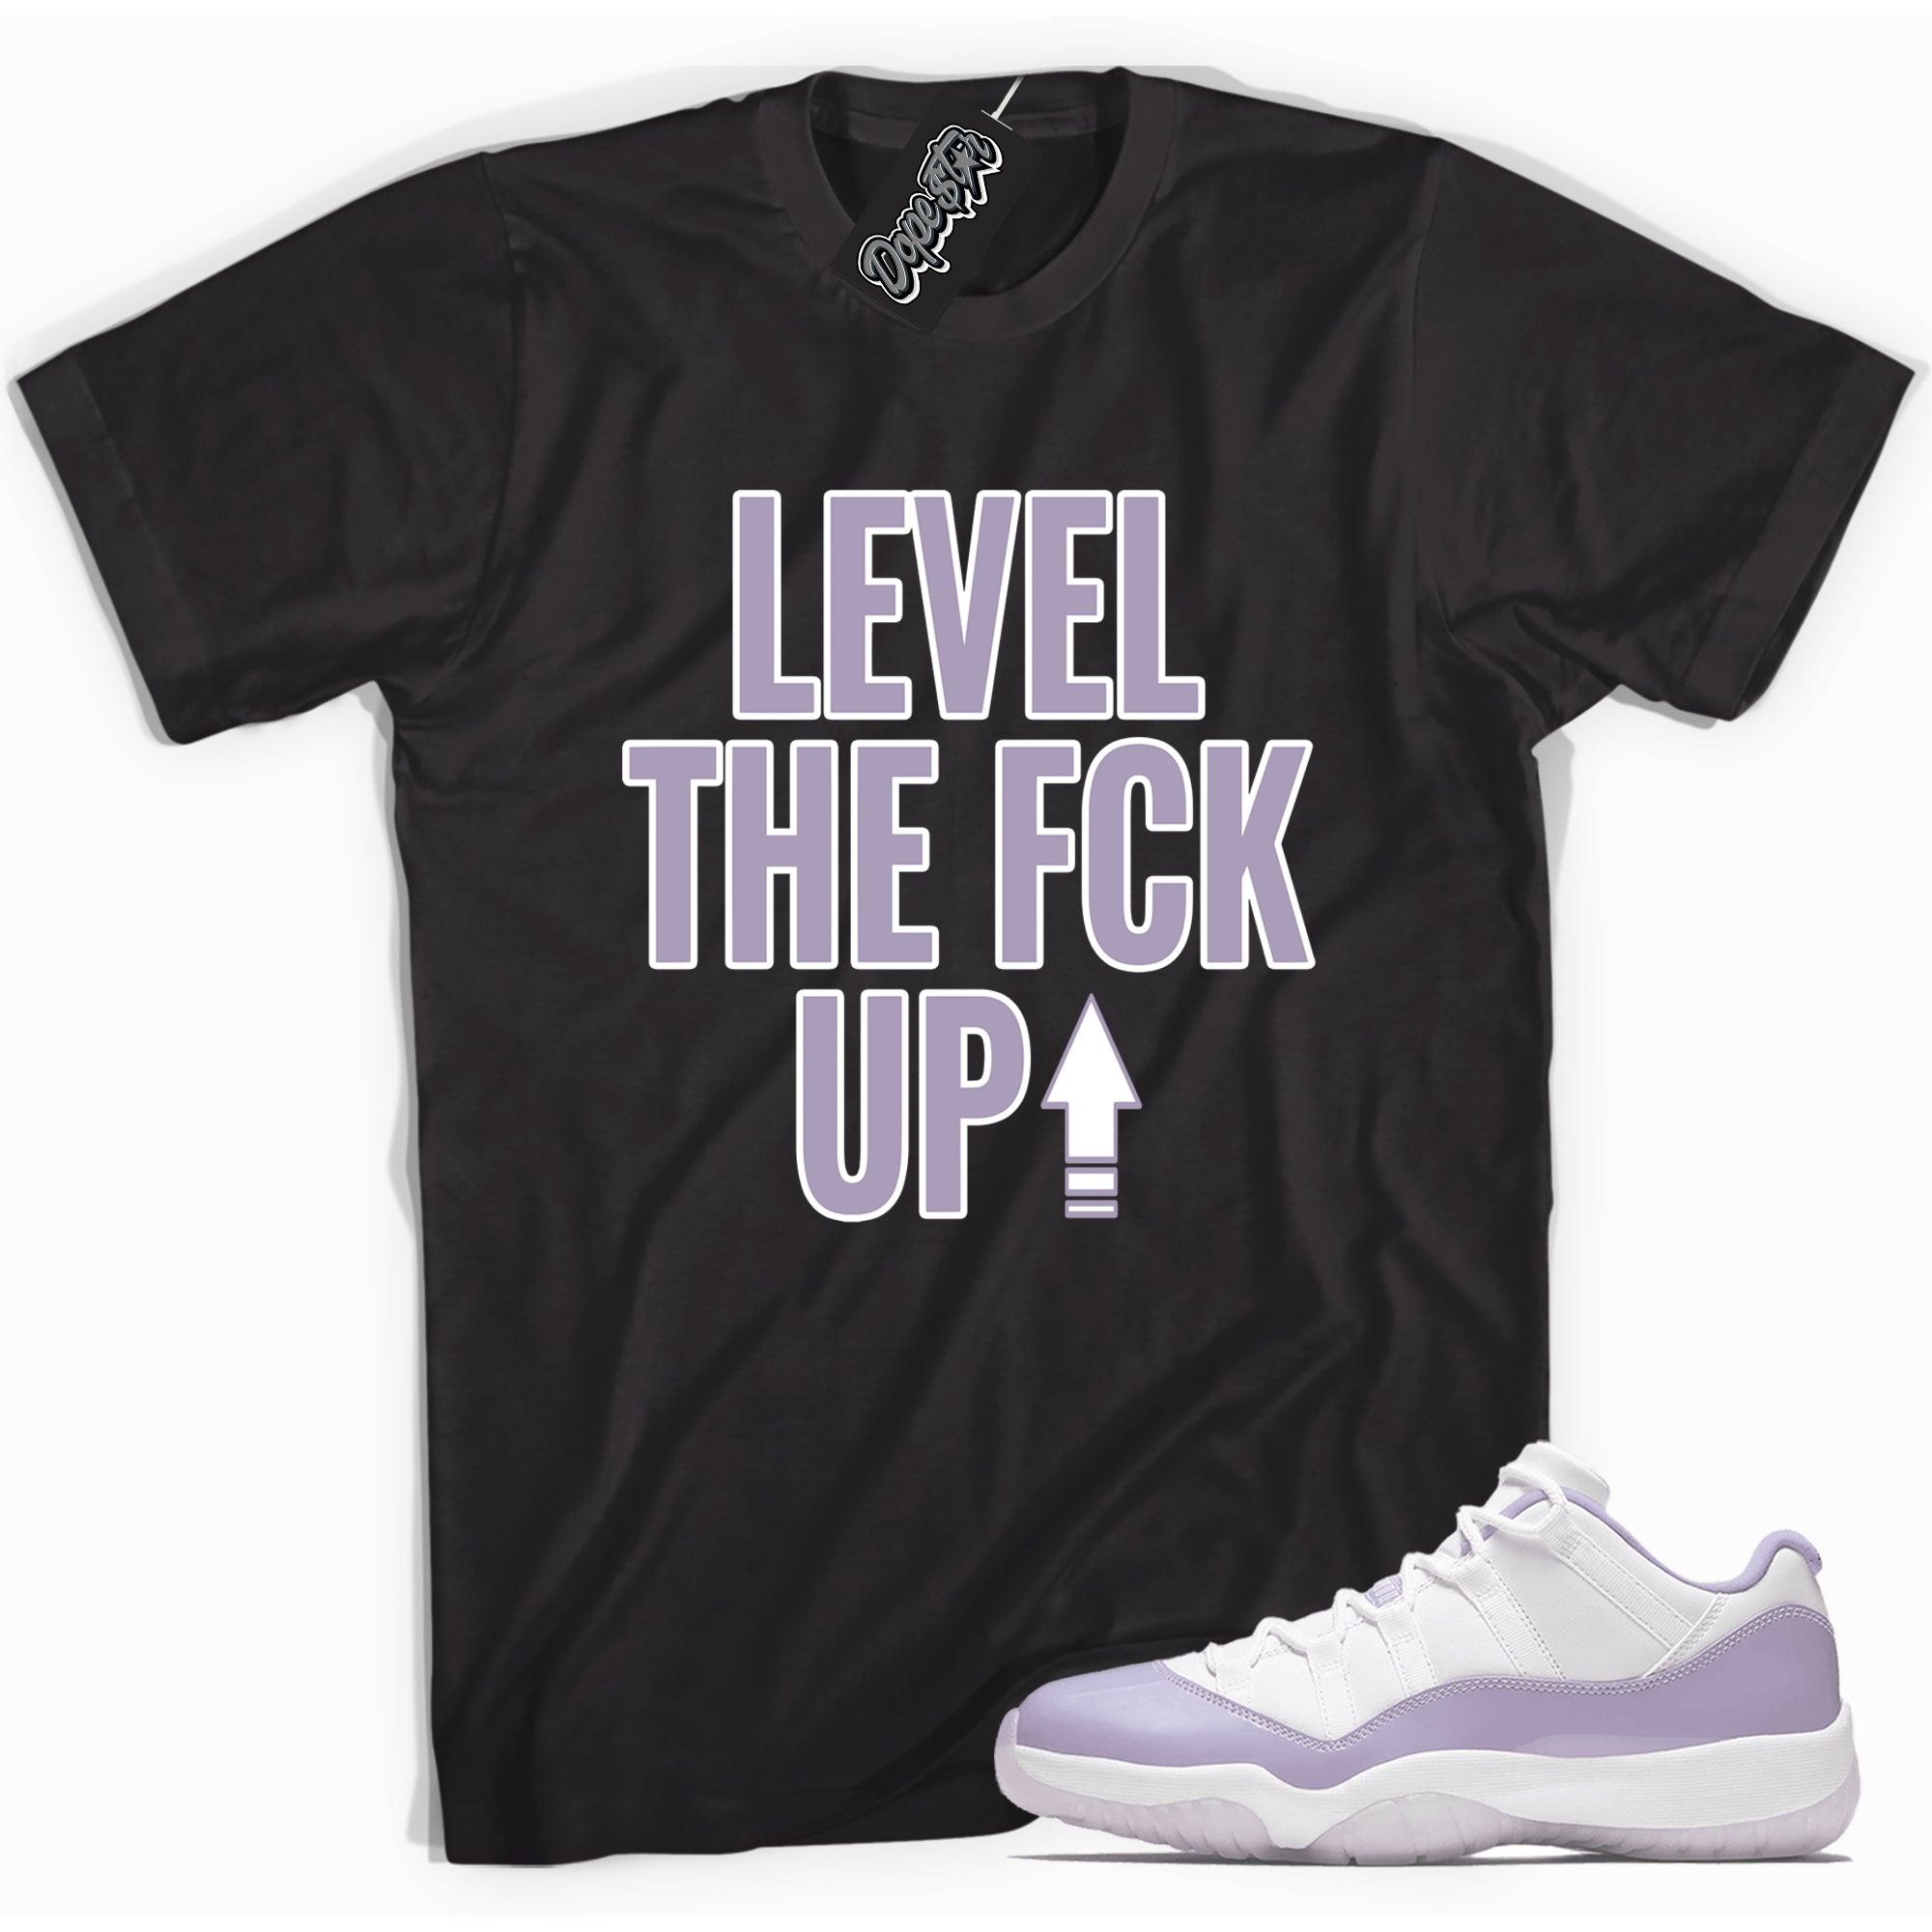 Cool black graphic tee with 'Level Up' print, that perfectly matches Air Jordan 11 Retro Low Pure violet sneakers.